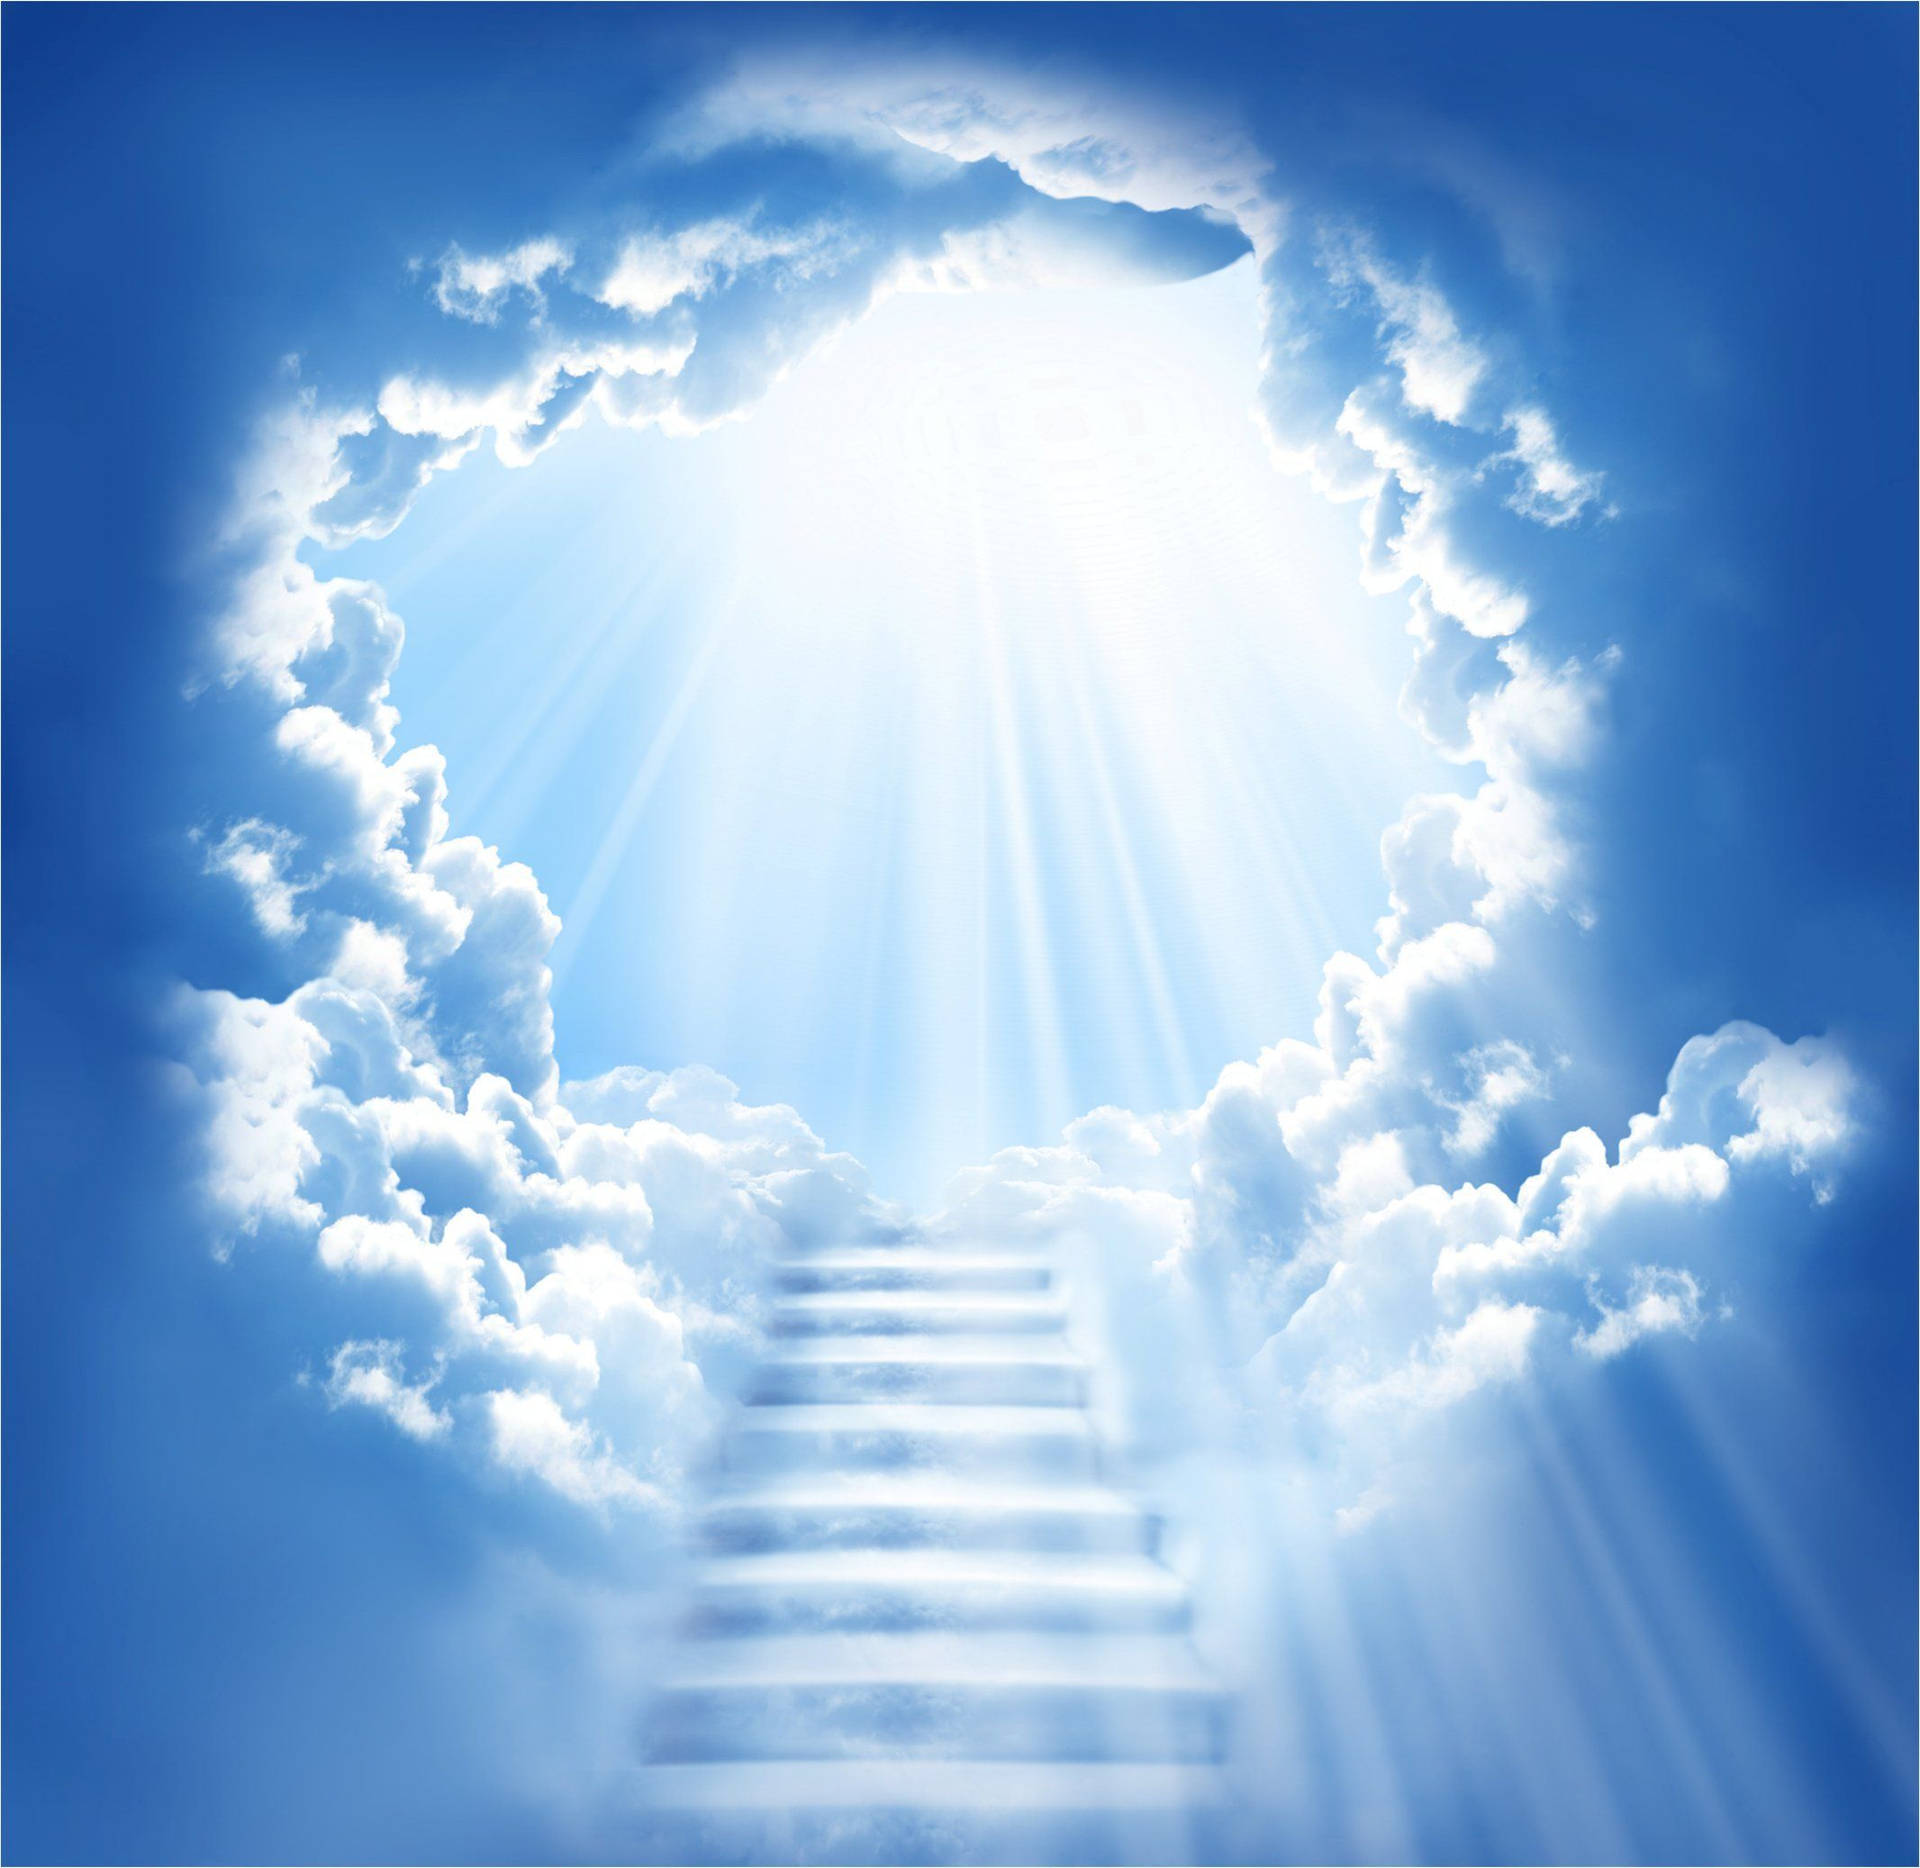 Funeral Clouds With Stairway To Heaven Background